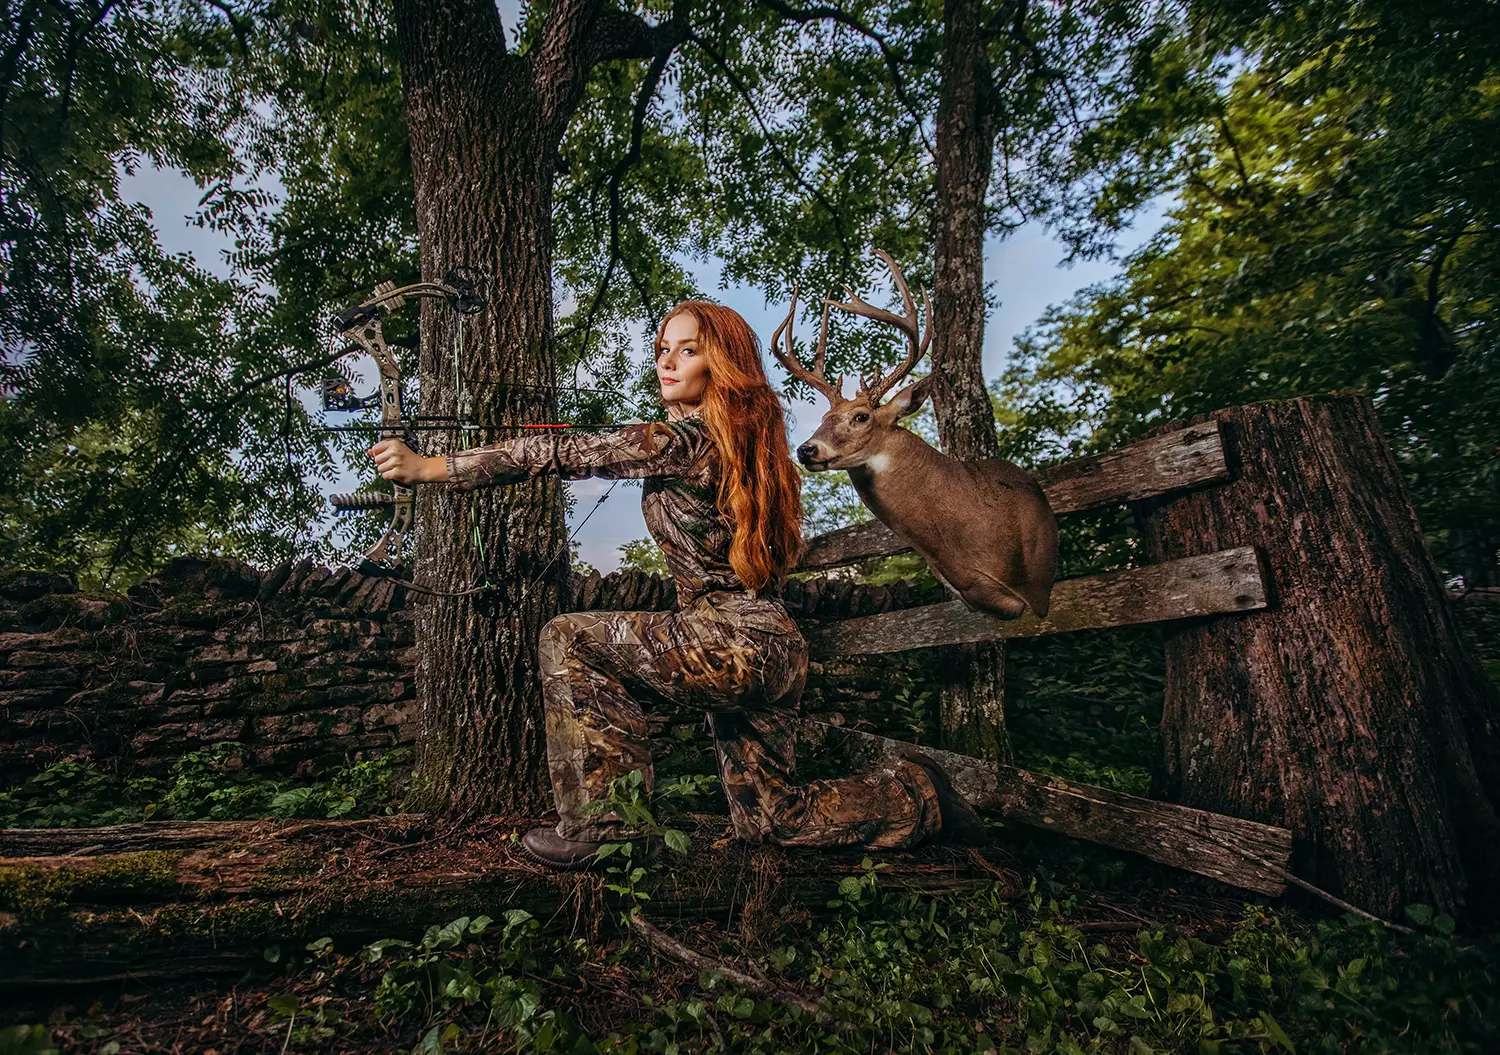 unique senior picture ideas for country girls